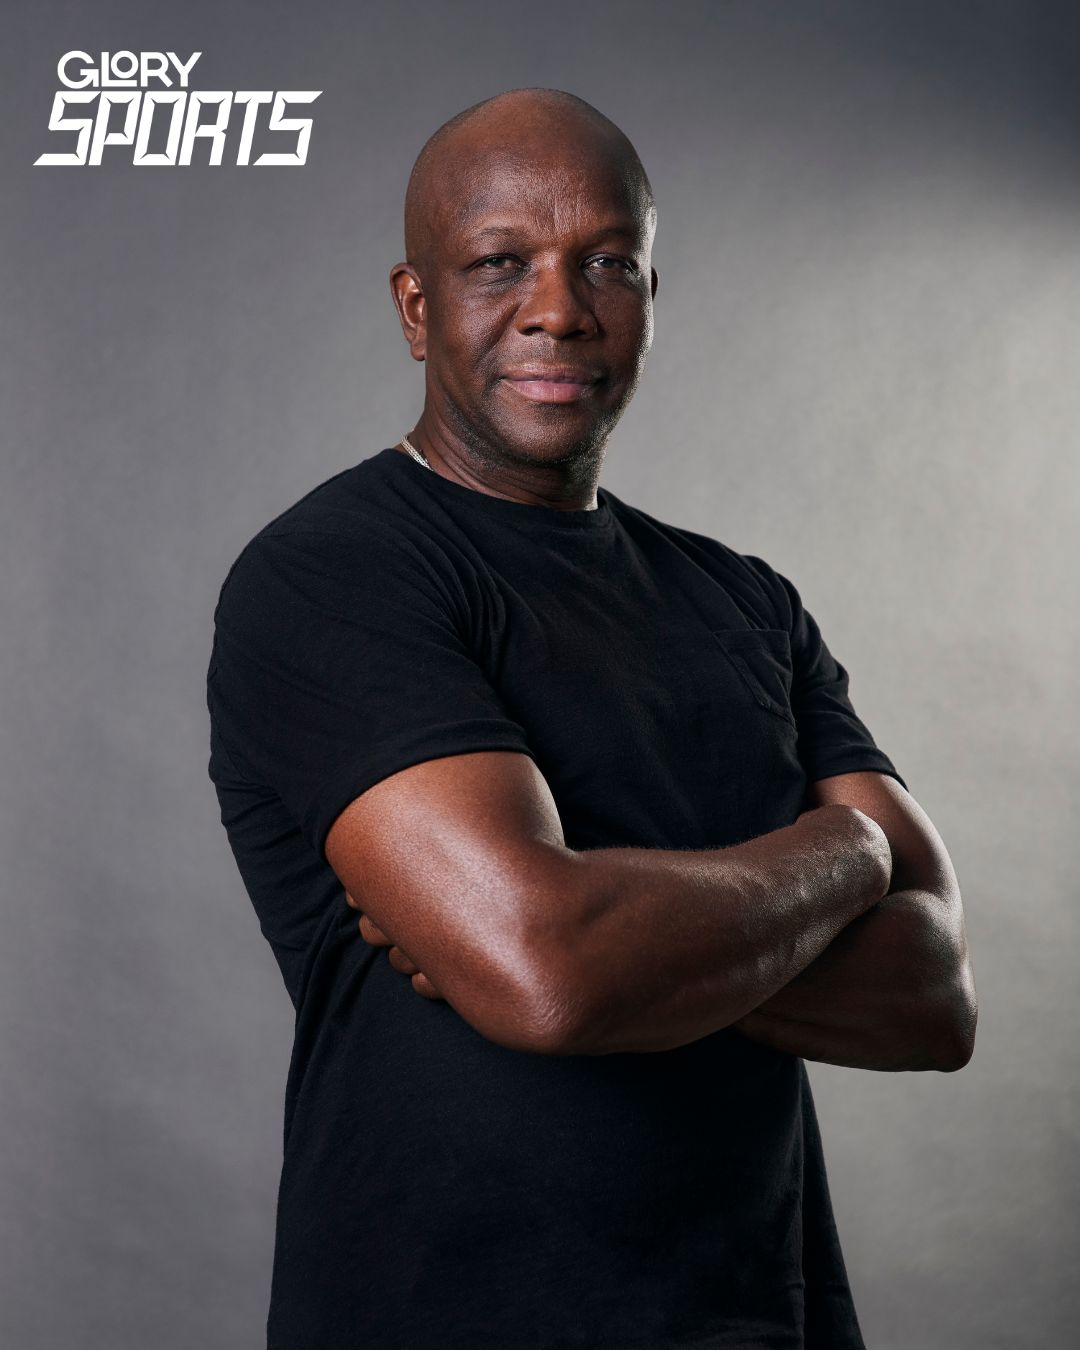 Olympian Donovan Bailey wearing a black t-shirt with arms crossed across his chest. He is looking directly into the camera against a grey background.